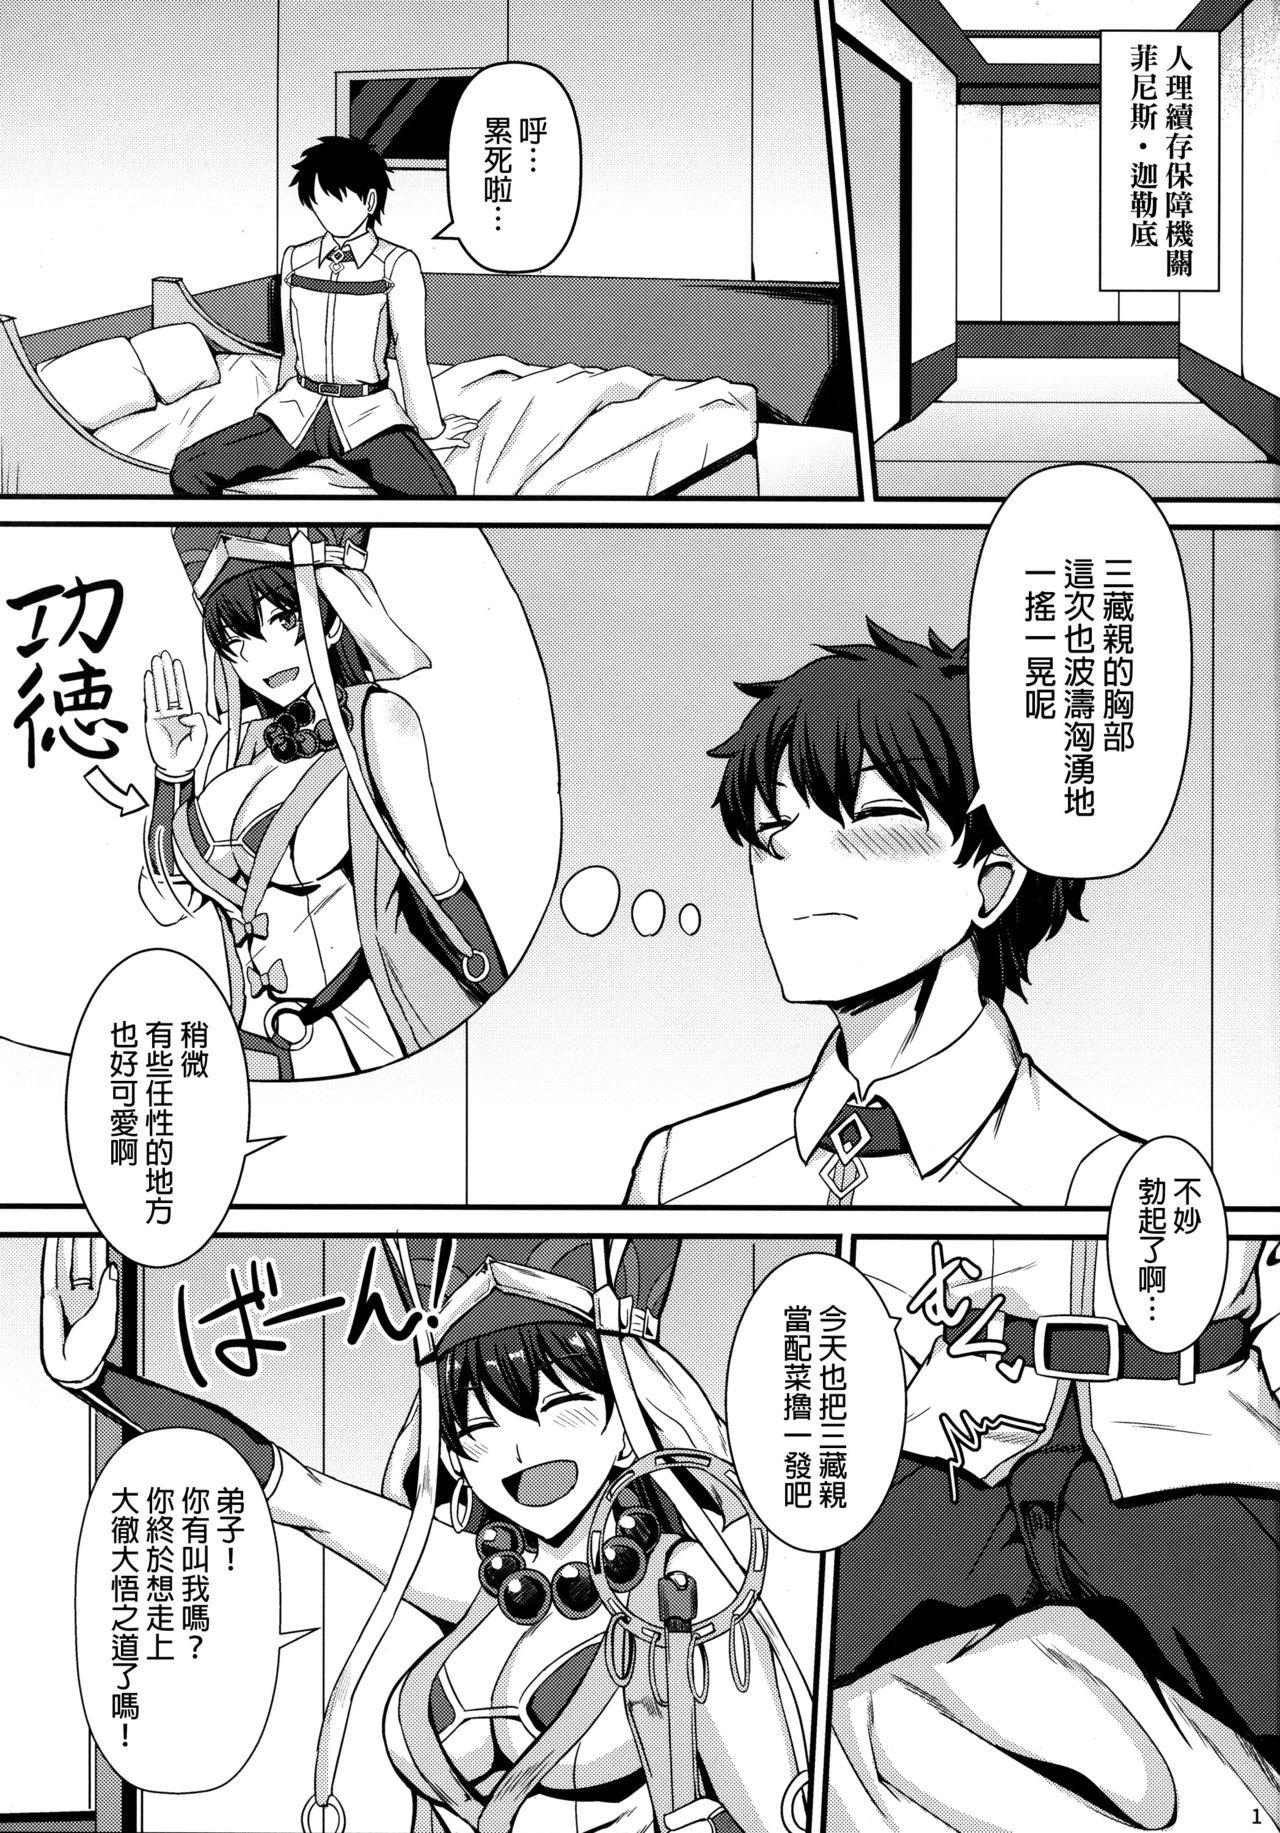 Brother Sister Burning Halo - Fate grand order Cheerleader - Page 2